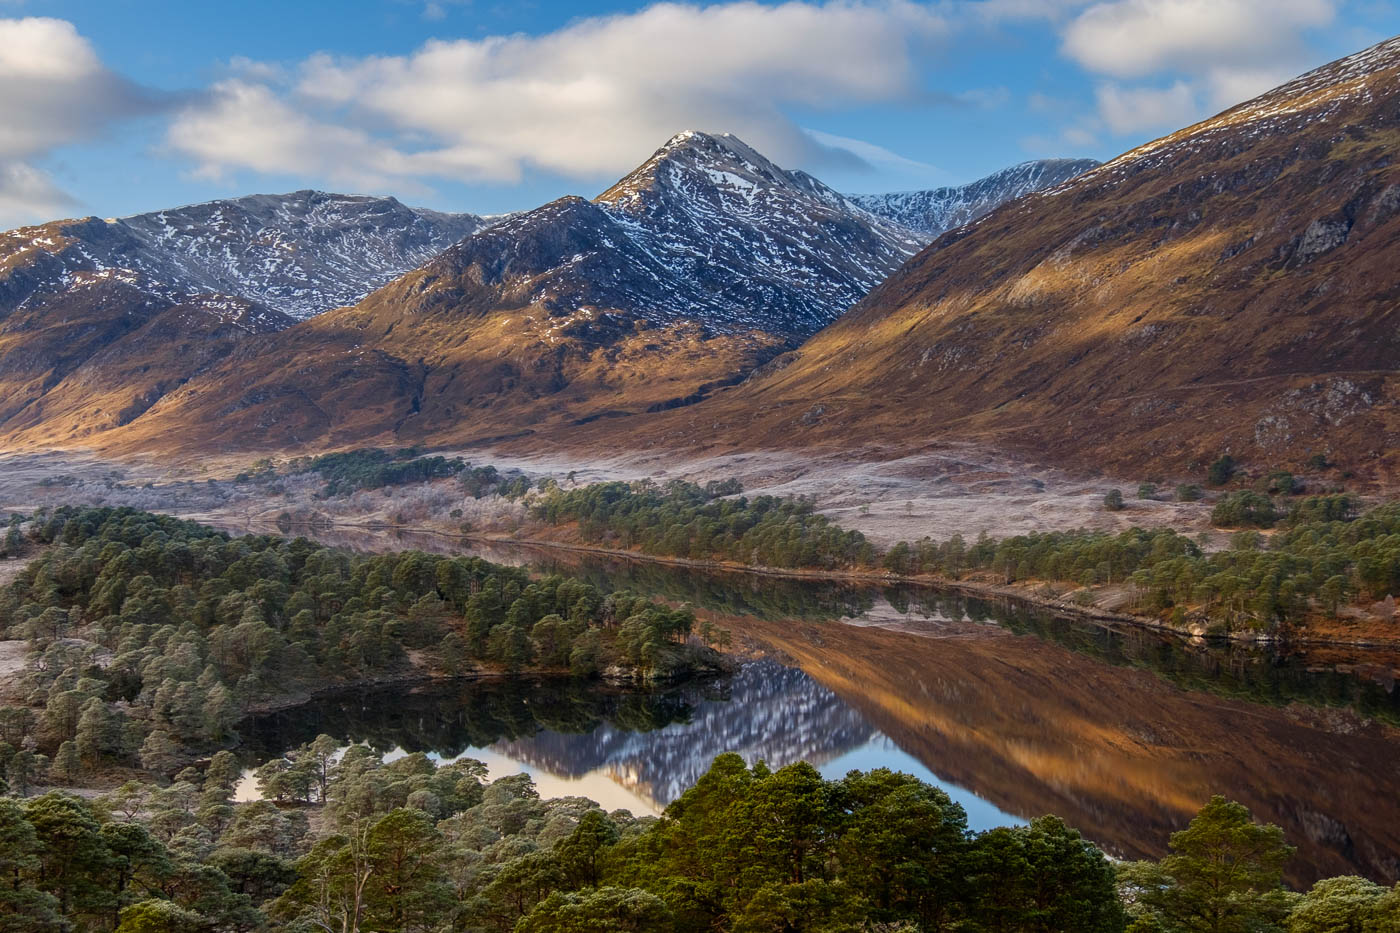 The Affric Highlands initiative will involve planting trees, restoring peat bogs, connecting wildlife habitats and restoring river corridors over 500,000 acres as part of a 30-year project to restore nature to one of Scotland’s most iconic regions.